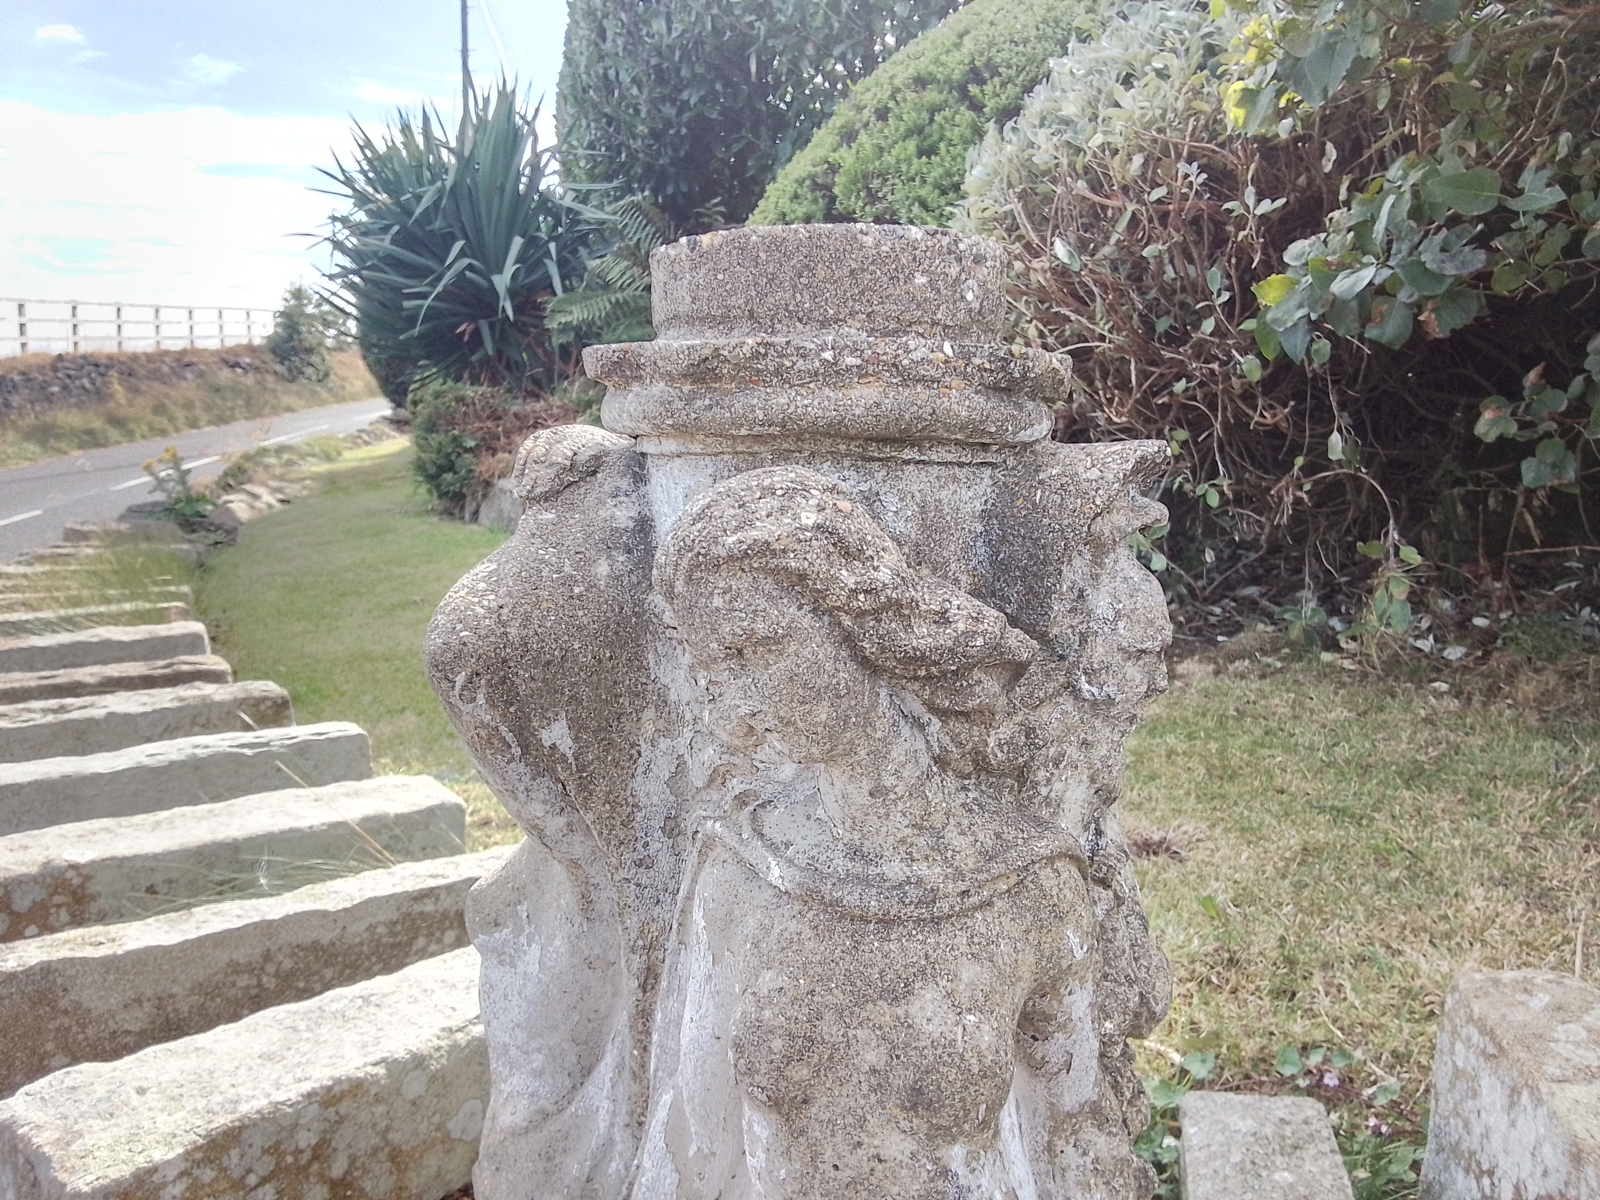 Nokia T10 camera sample showing a small statue in daylight